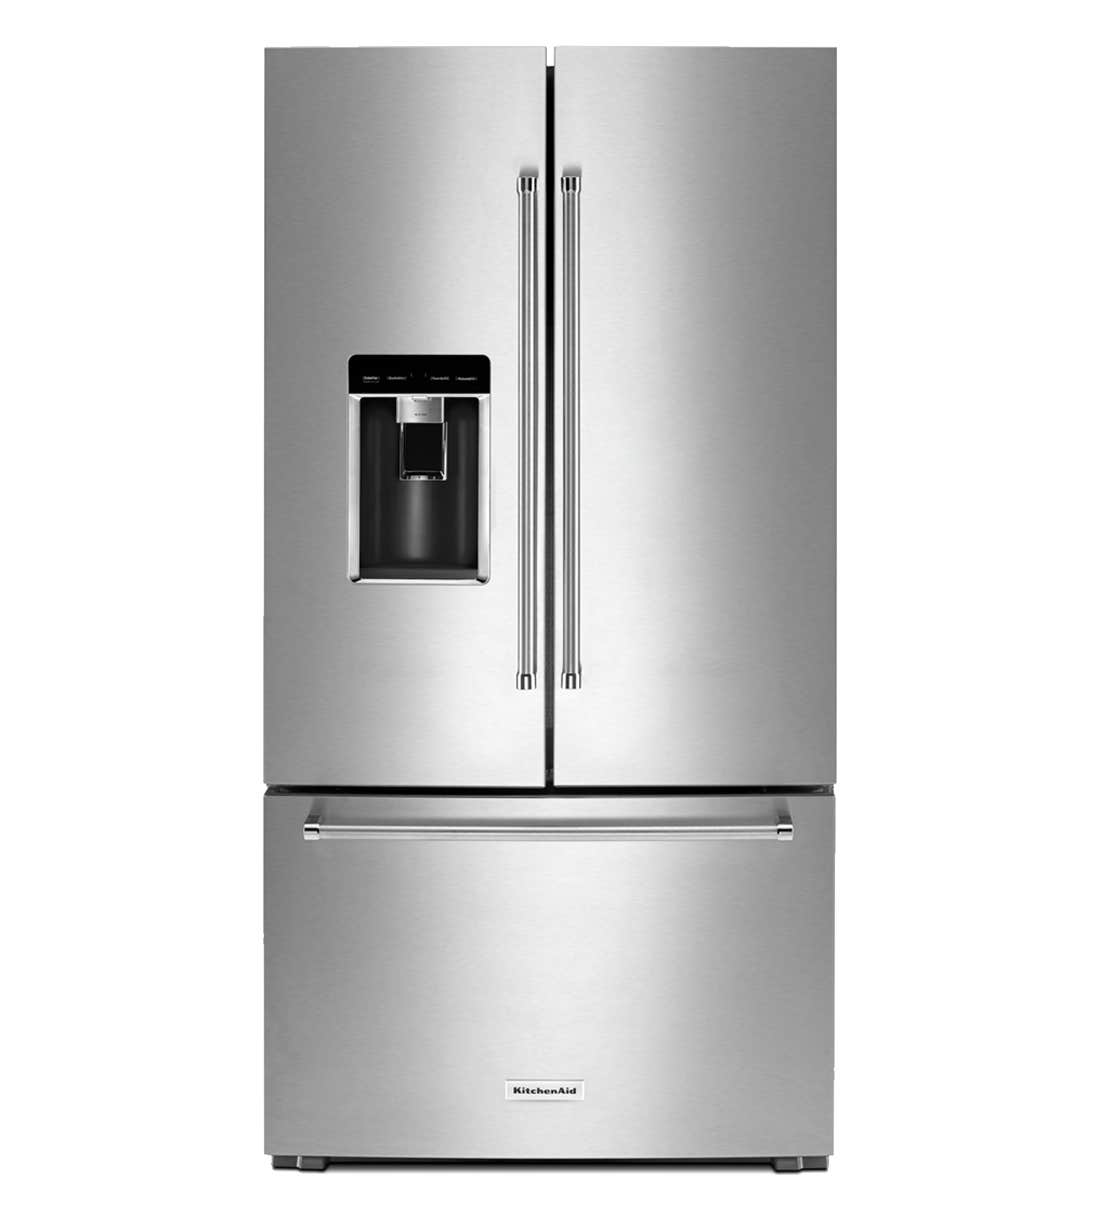 Kitchen Aid Refrigerator in Stainless Steel color showcased by Corbeil Electro Store